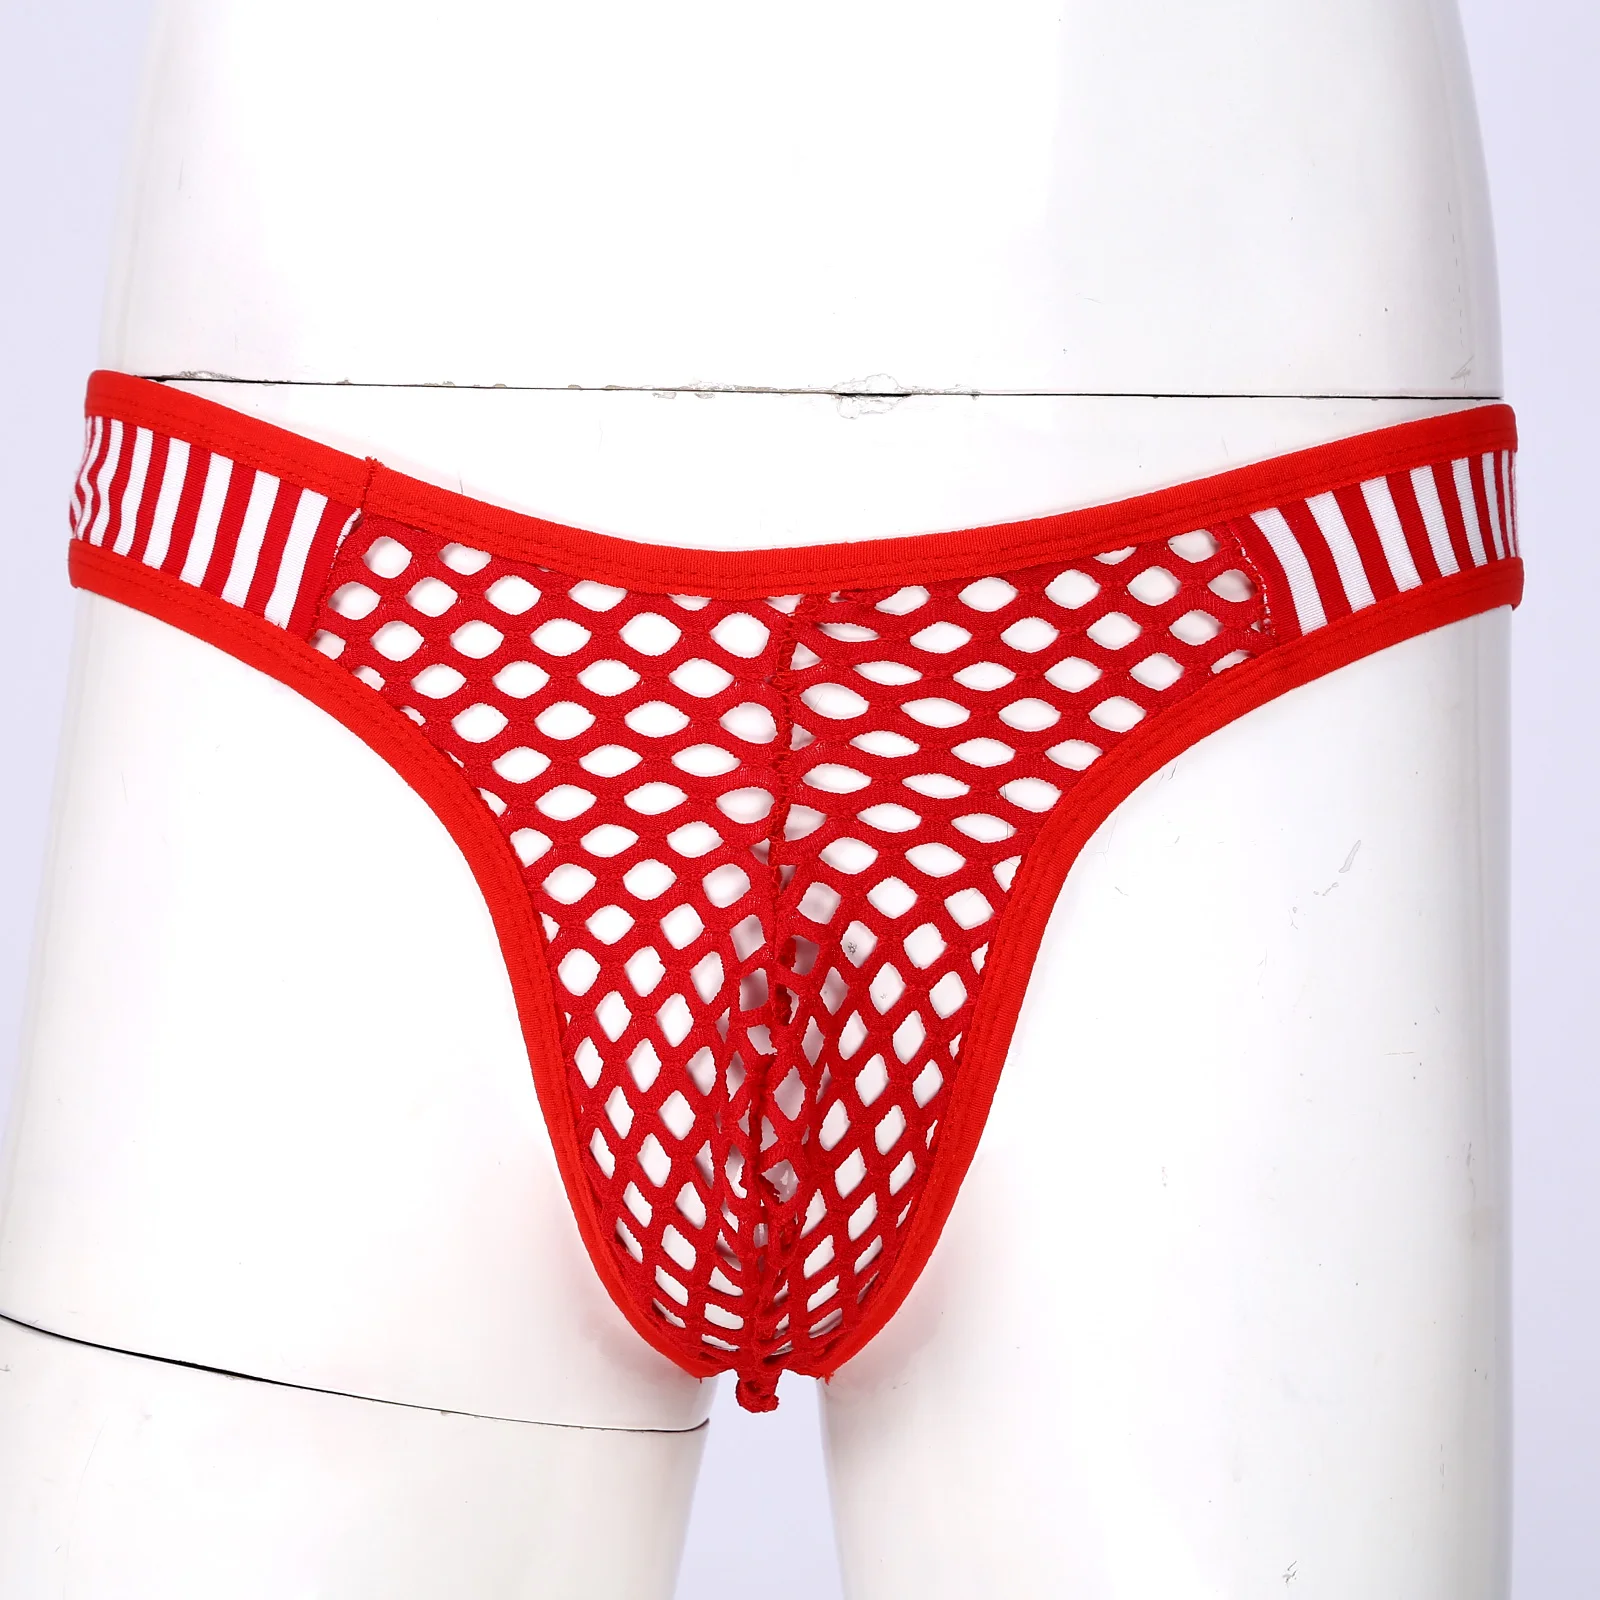 womens boxer shorts Men's Panties See-through Fishnet Briefs Low Waist Striped Elastic Waistband Thongs Hollow Out Bulge Pouch Underpants Underwear teddy lingerie